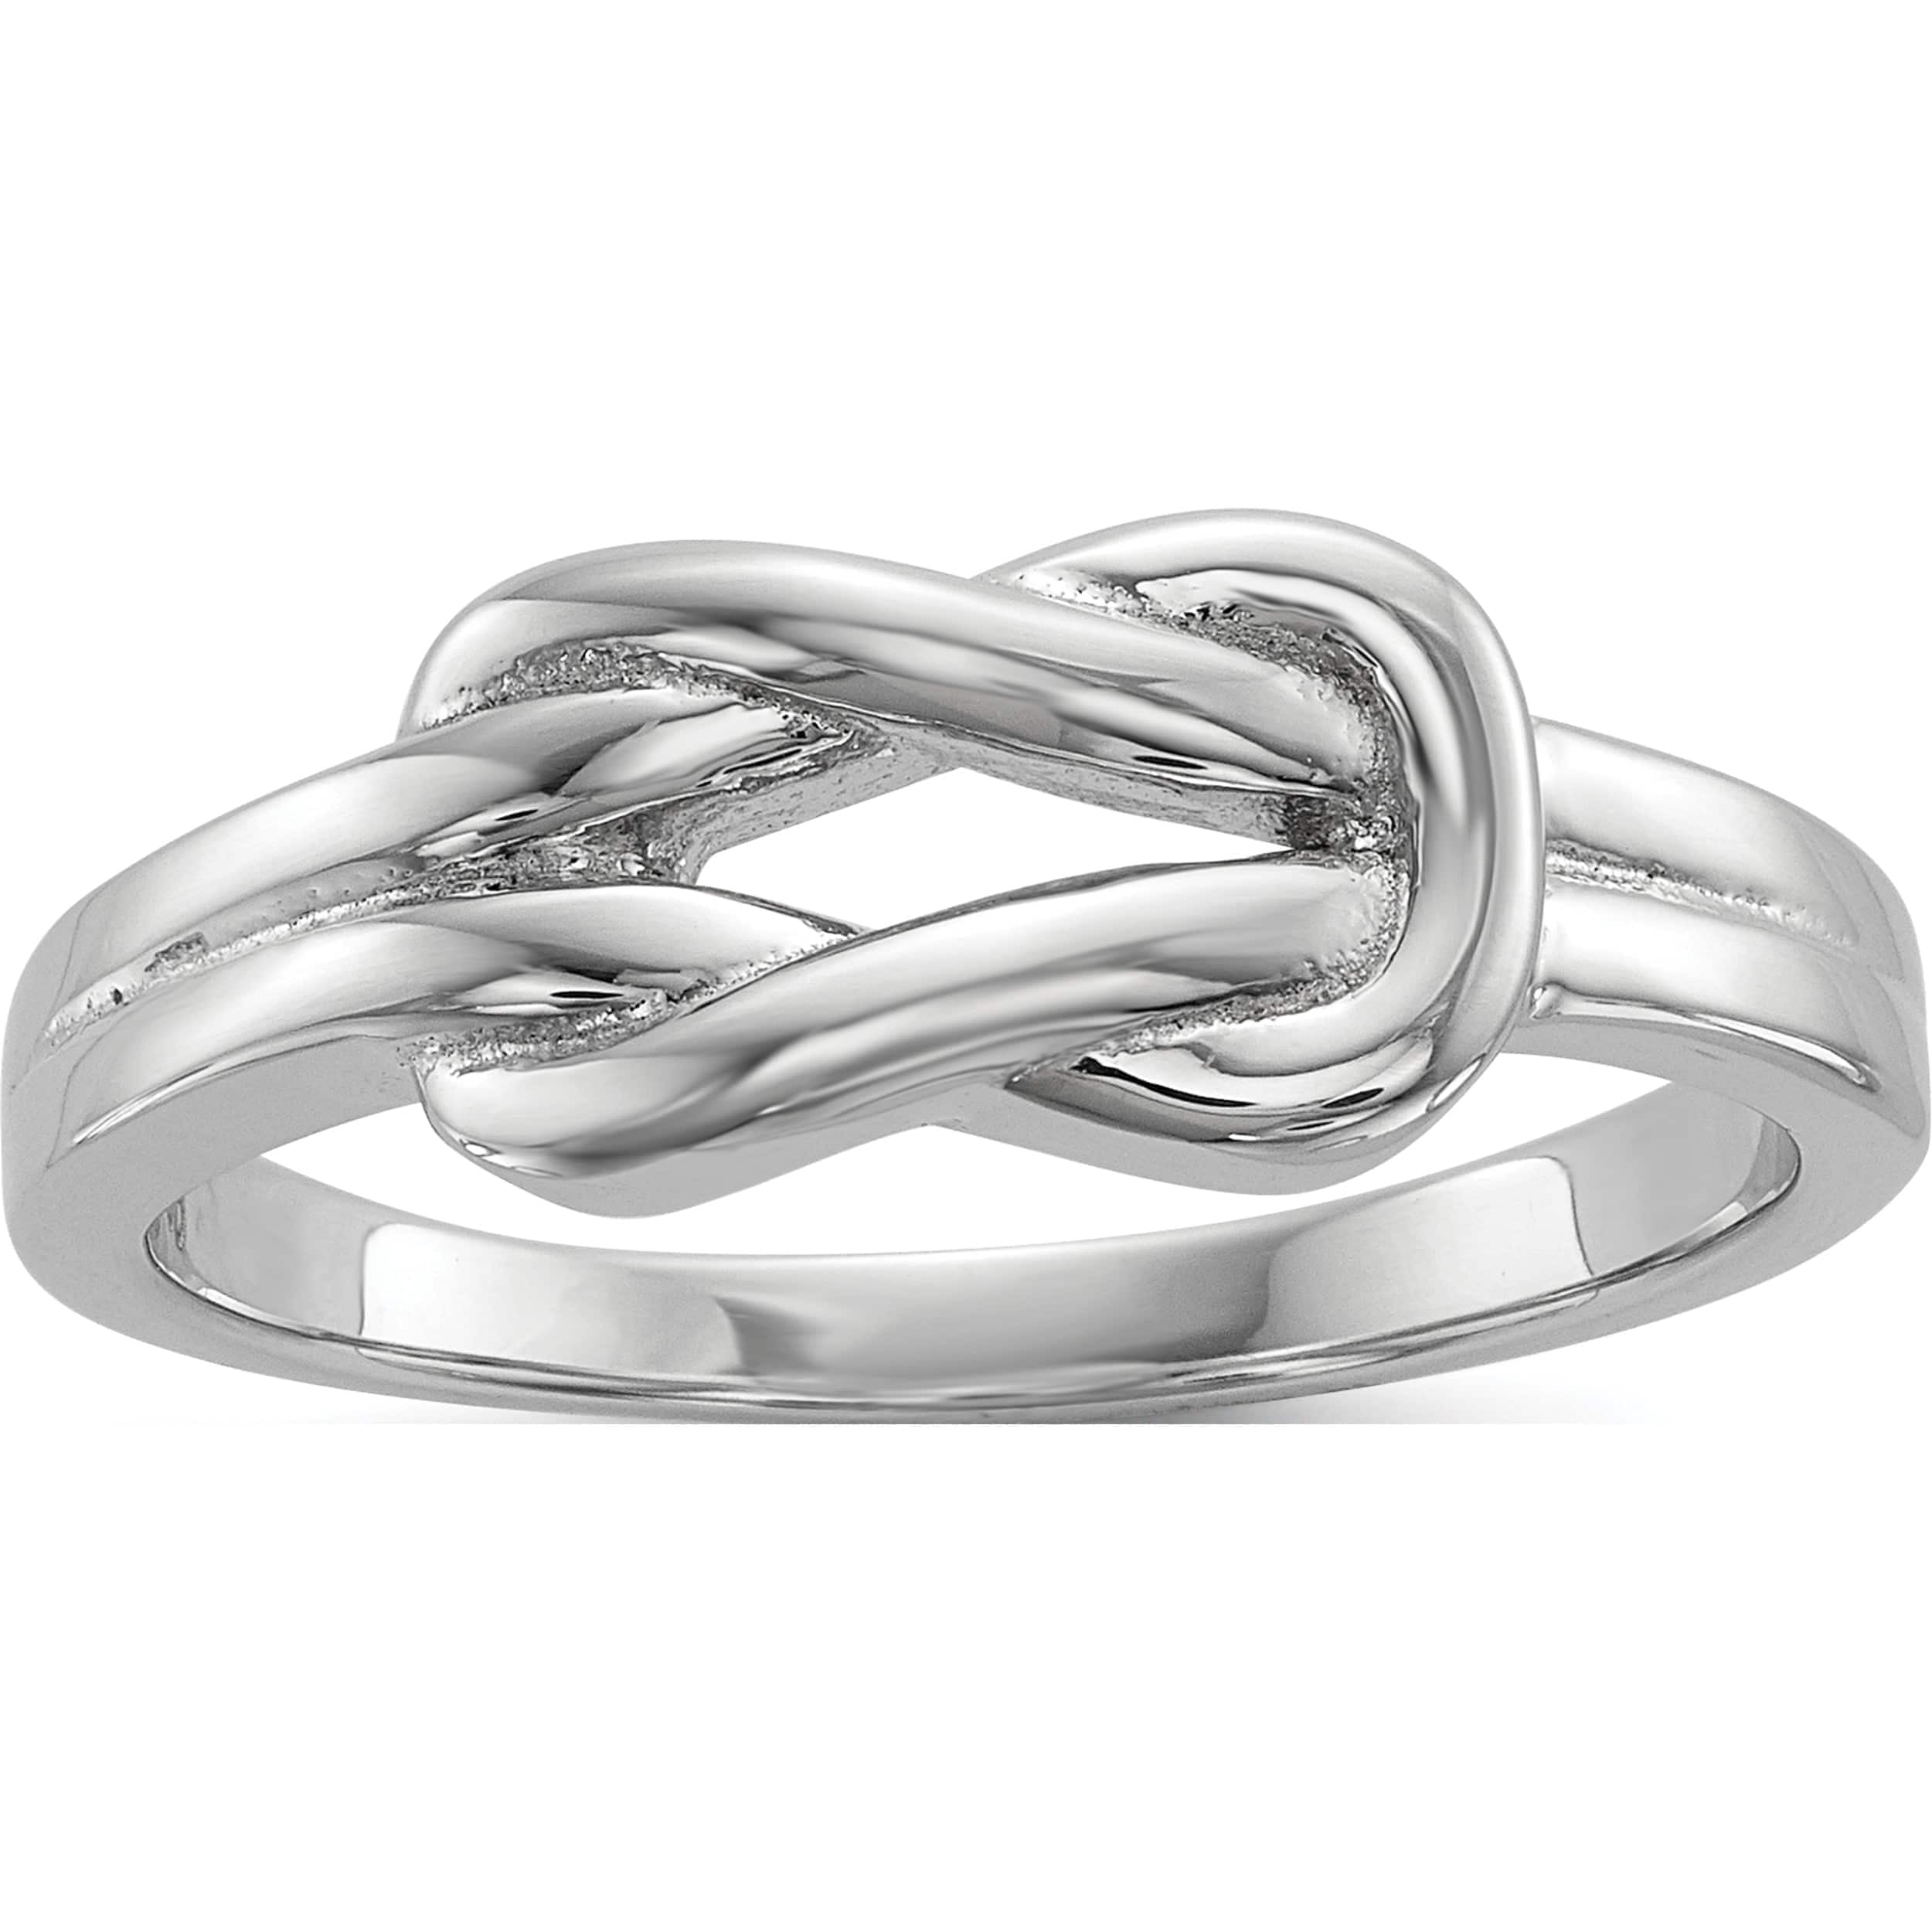 Polished Love Knot Rhodium Ring Real Sterling Silver 925